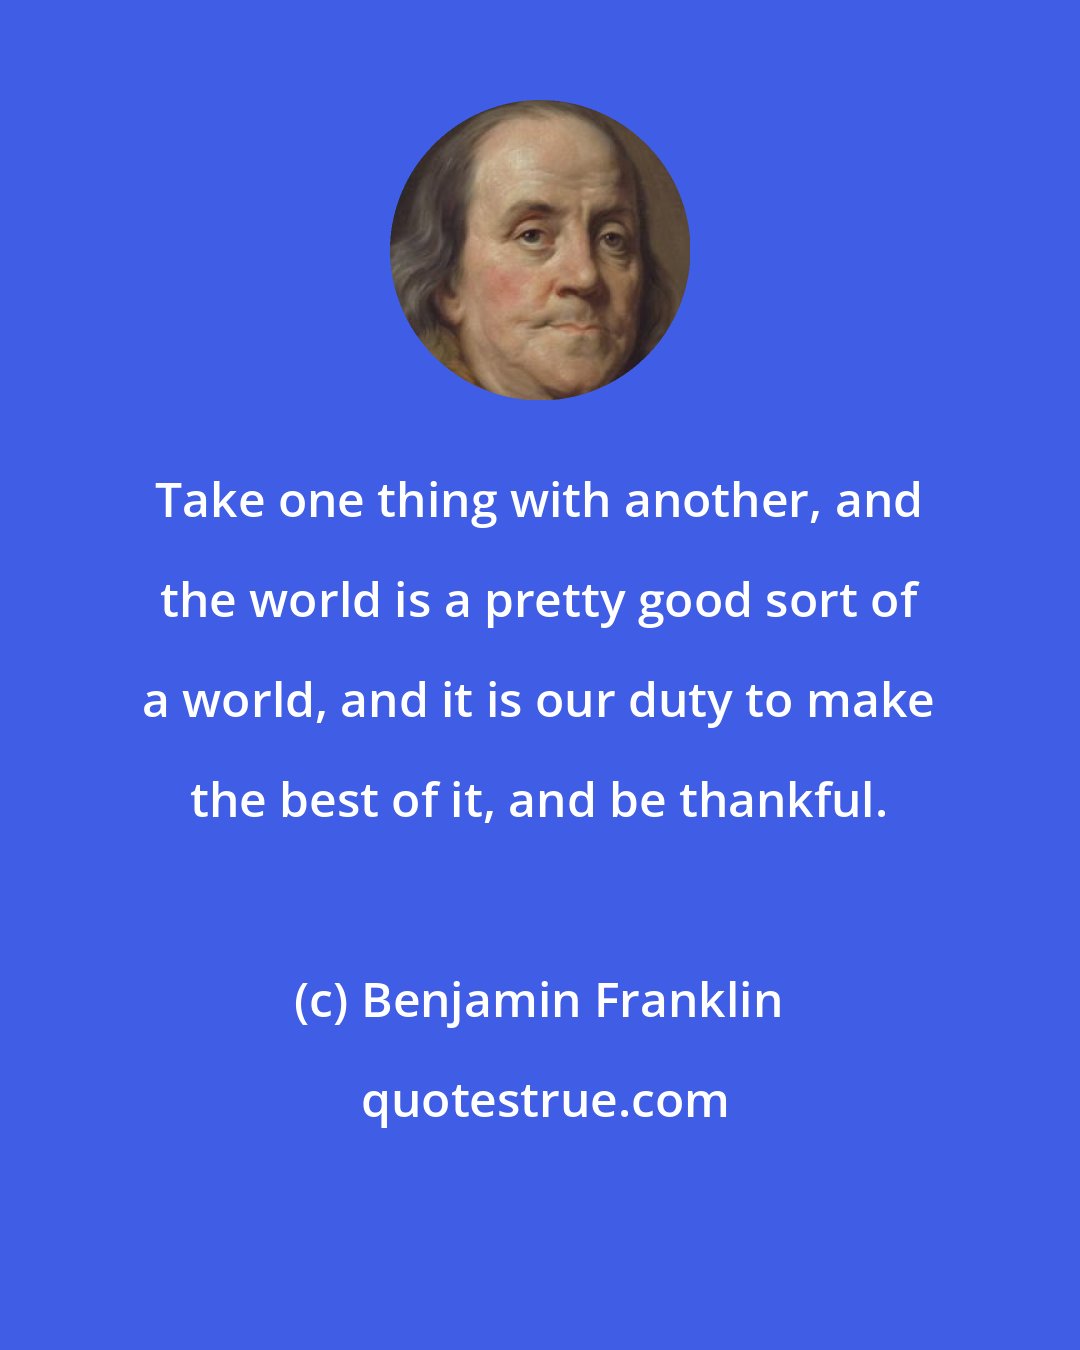 Benjamin Franklin: Take one thing with another, and the world is a pretty good sort of a world, and it is our duty to make the best of it, and be thankful.